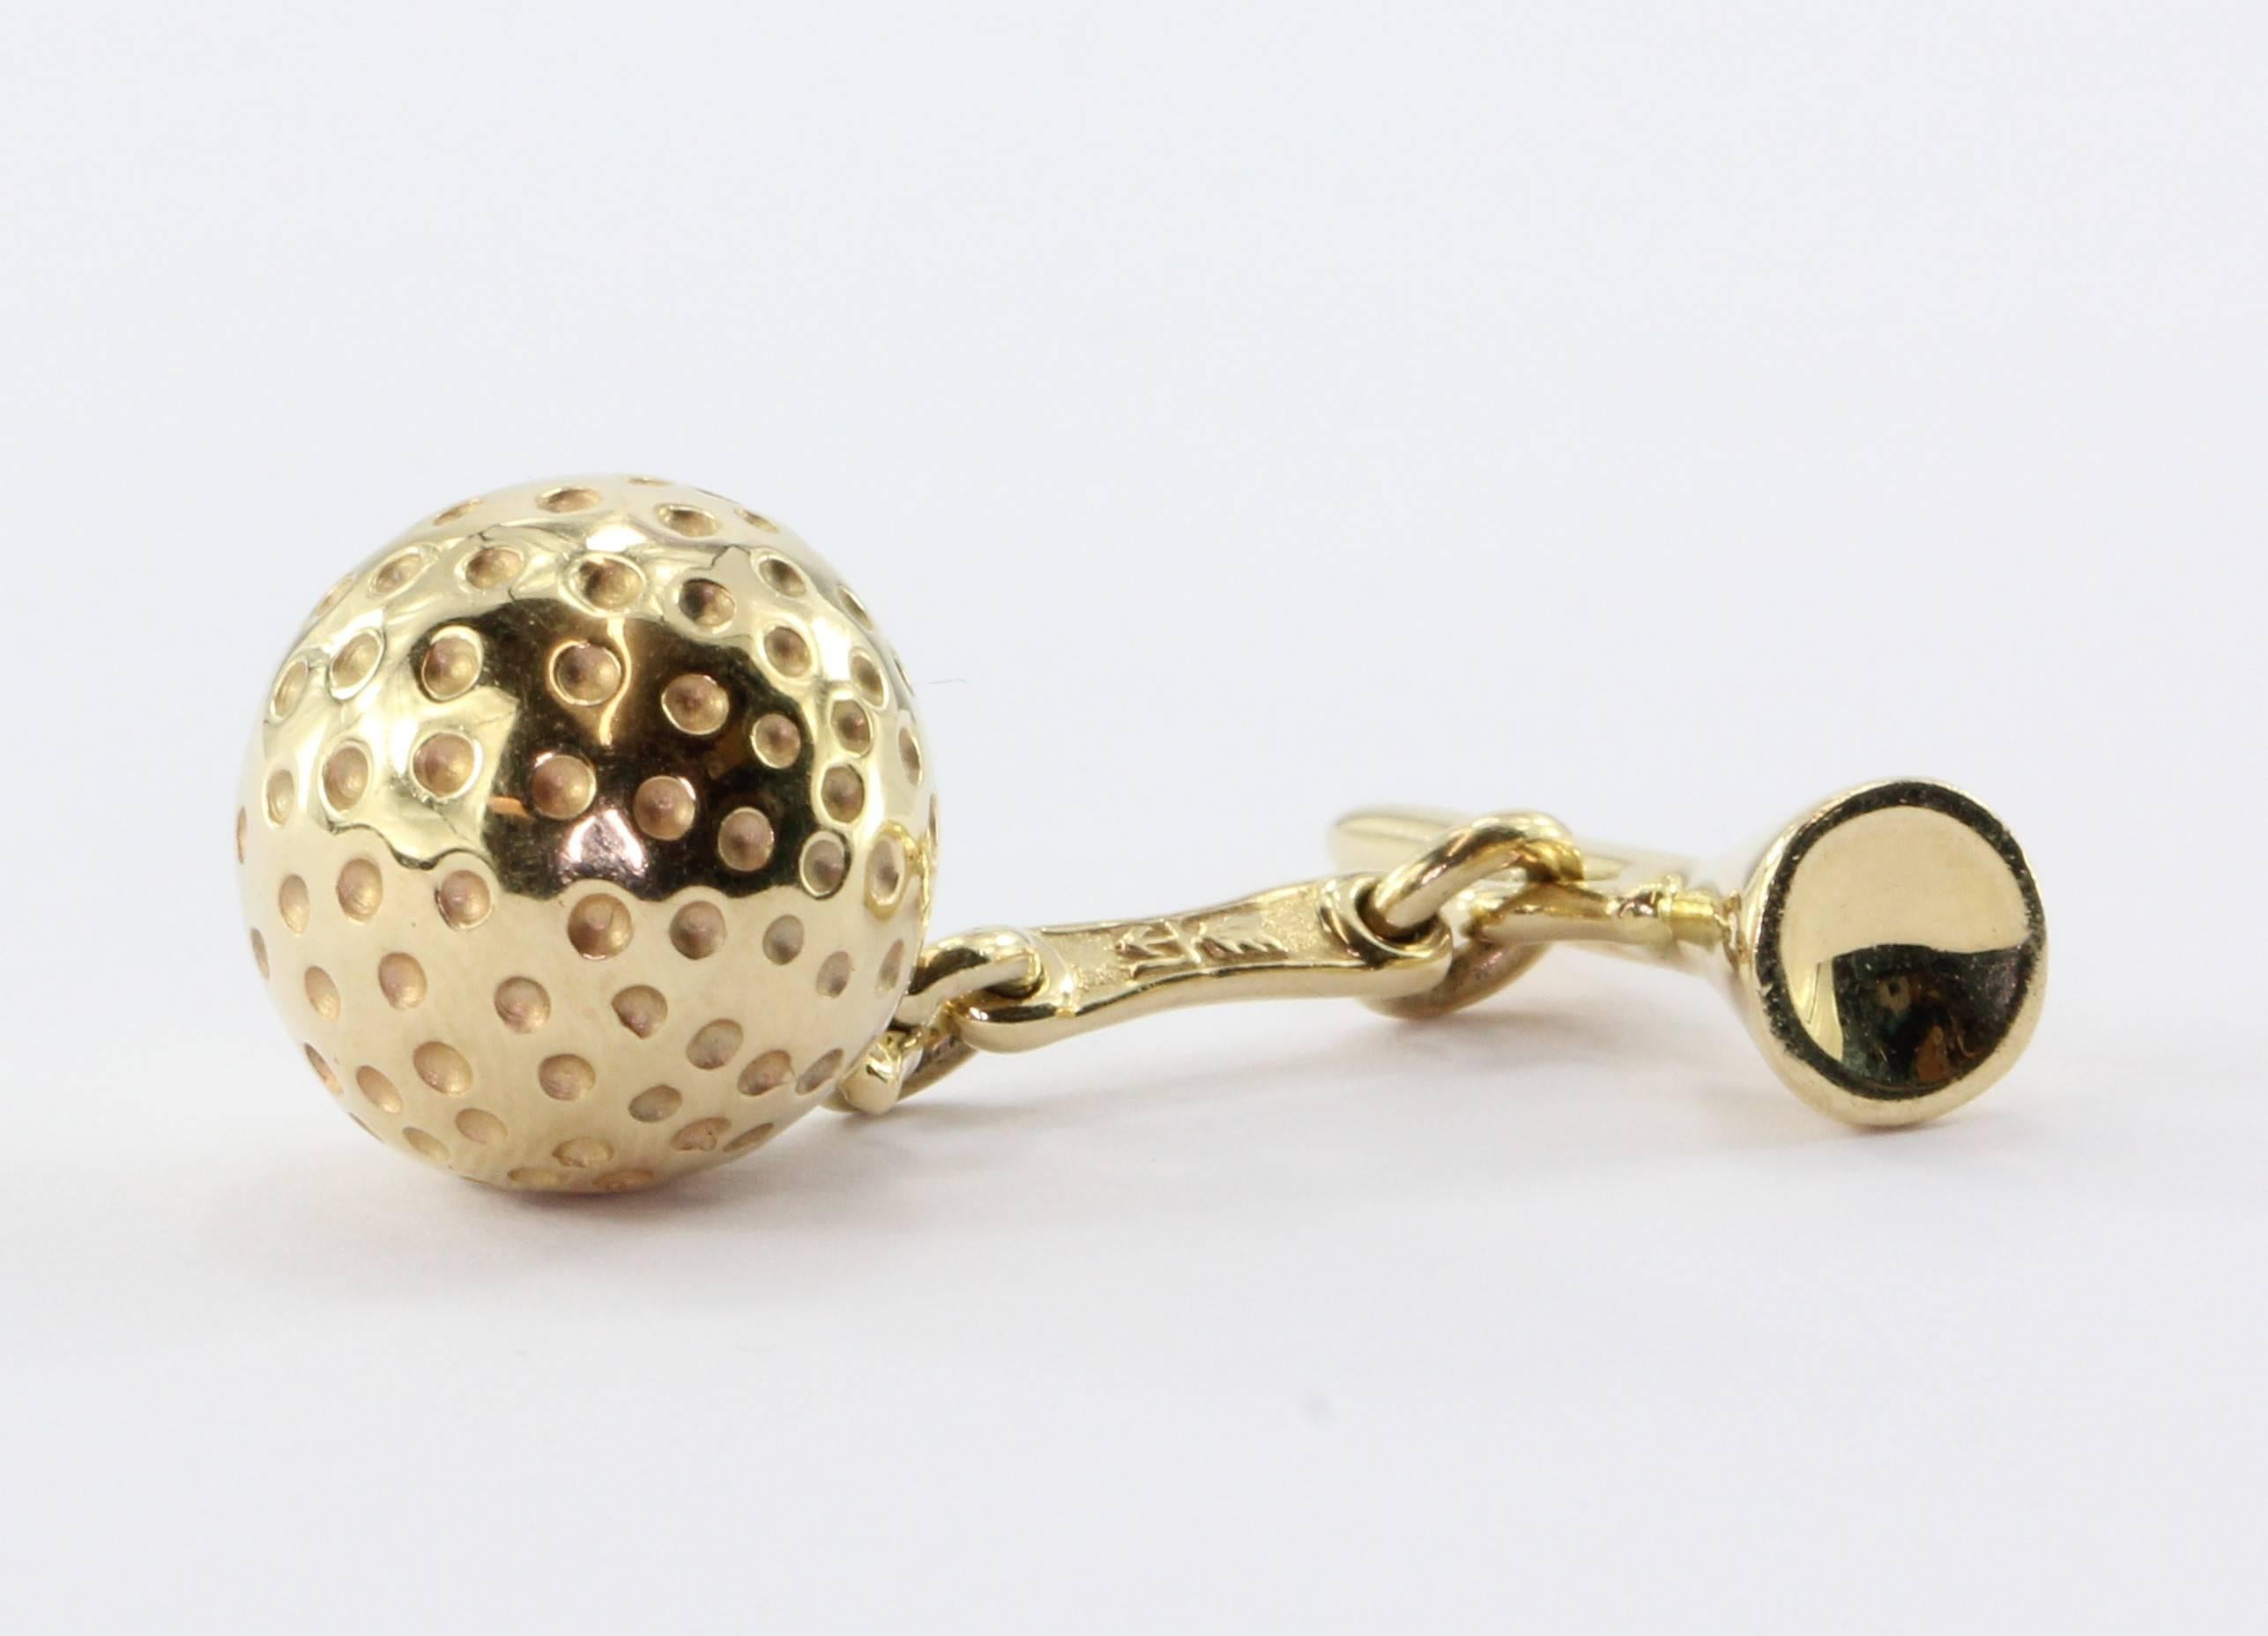 14K Gold Golfball & Tee Cufflinks. The cufflinks are in excellent estate condition and ready to wear. They are hallmarked 14K and a makermark. The golfballs measures .55" in diameter, the tee measures about .80" and together they weigh